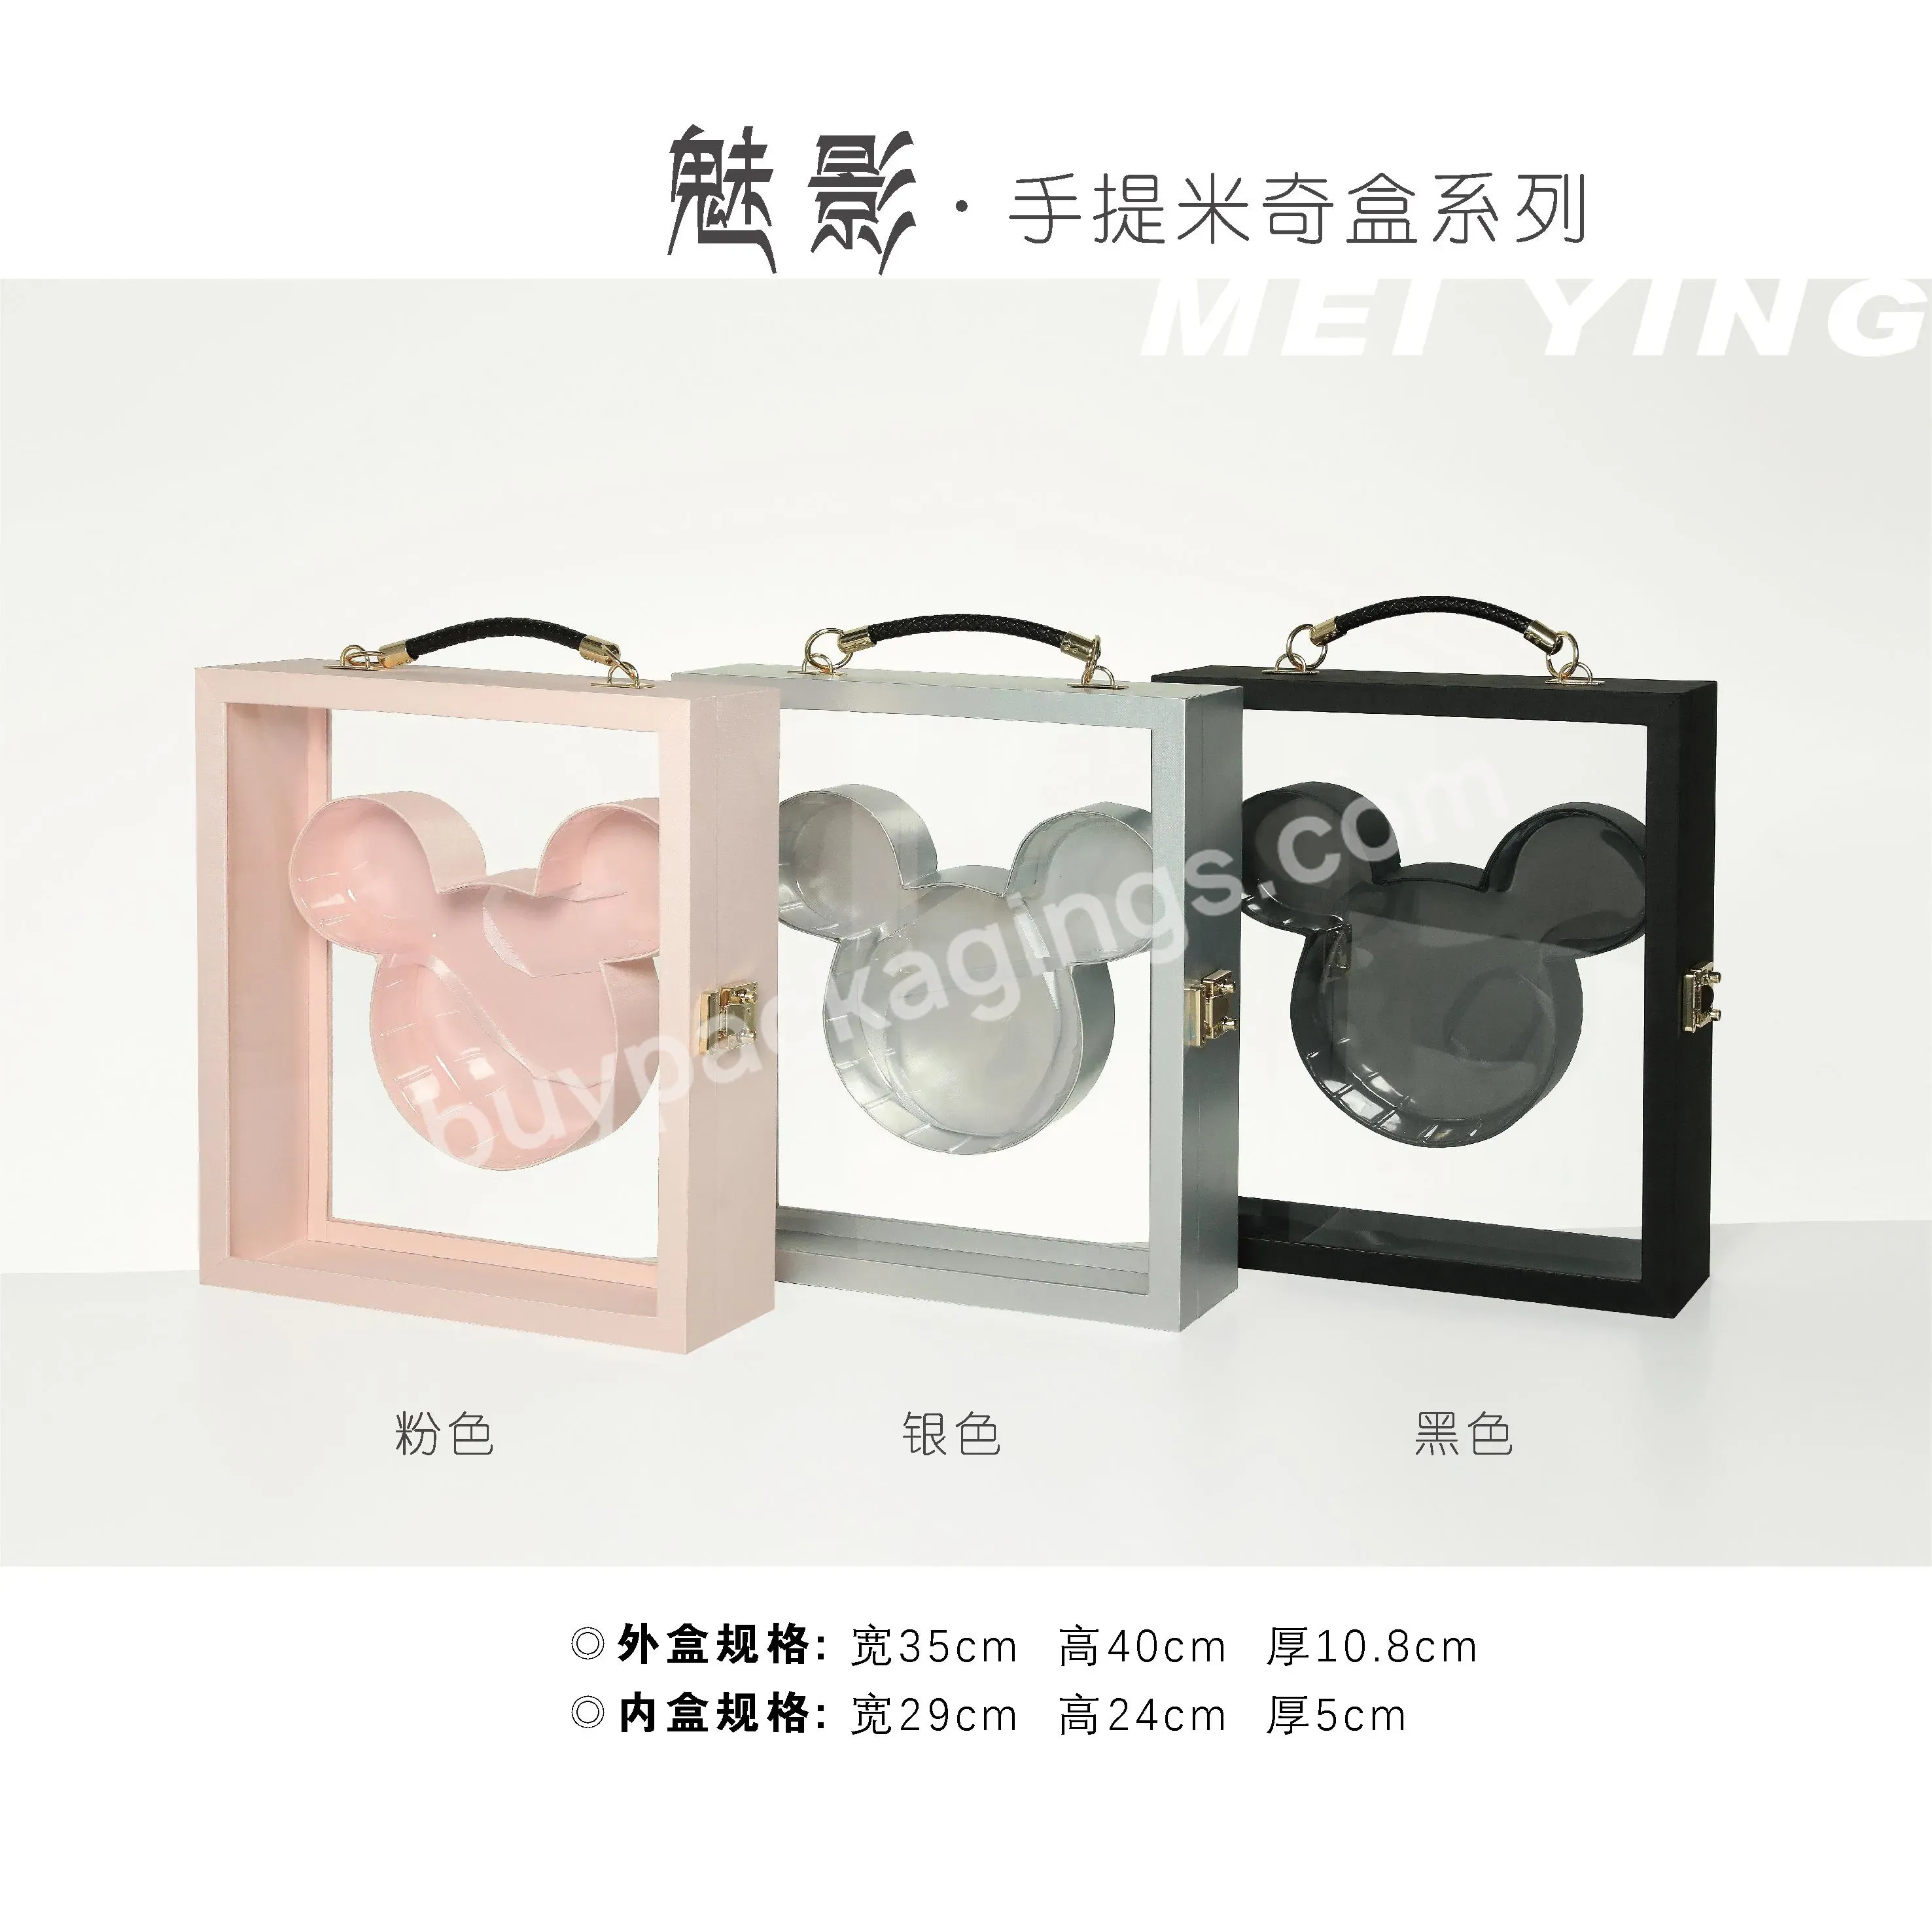 Wholesale Luxury Leather Square Flower Boxes Floral Box With Mickey Shape Inner For Valentine's Day Wedding - Buy Wholesale Luxury Leather Square Flower Boxes,Floral Box With Mickey Shape Inner,Floral Box For Valentine's Day Wedding.